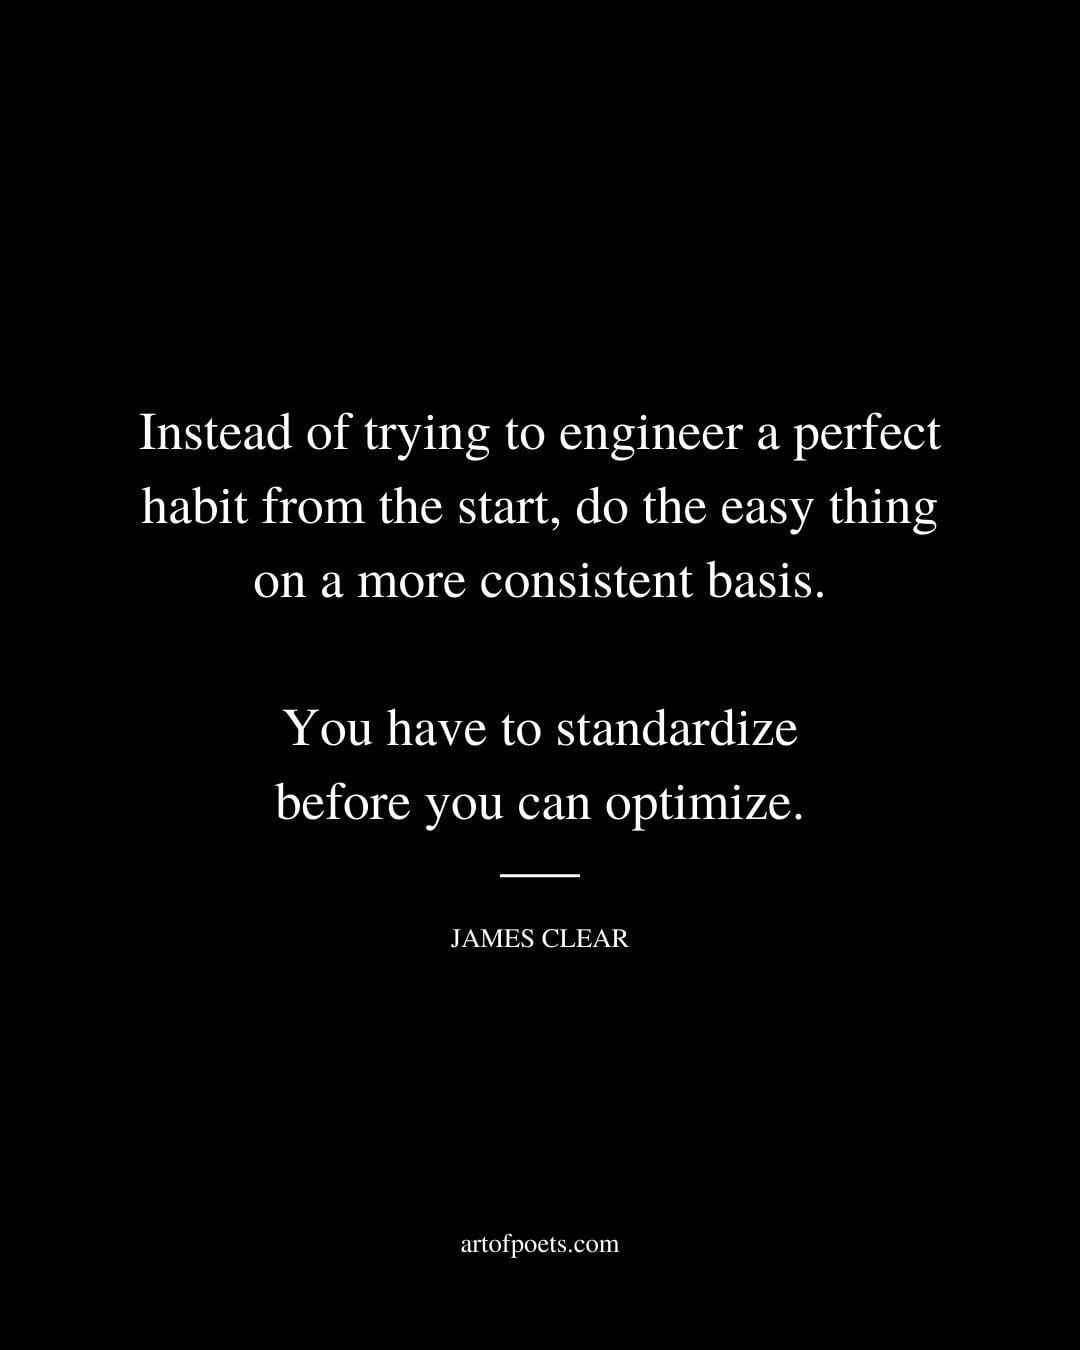 Instead of trying to engineer a perfect habit from the start do the easy thing on a more consistent basis. You have to standardize before you can optimize